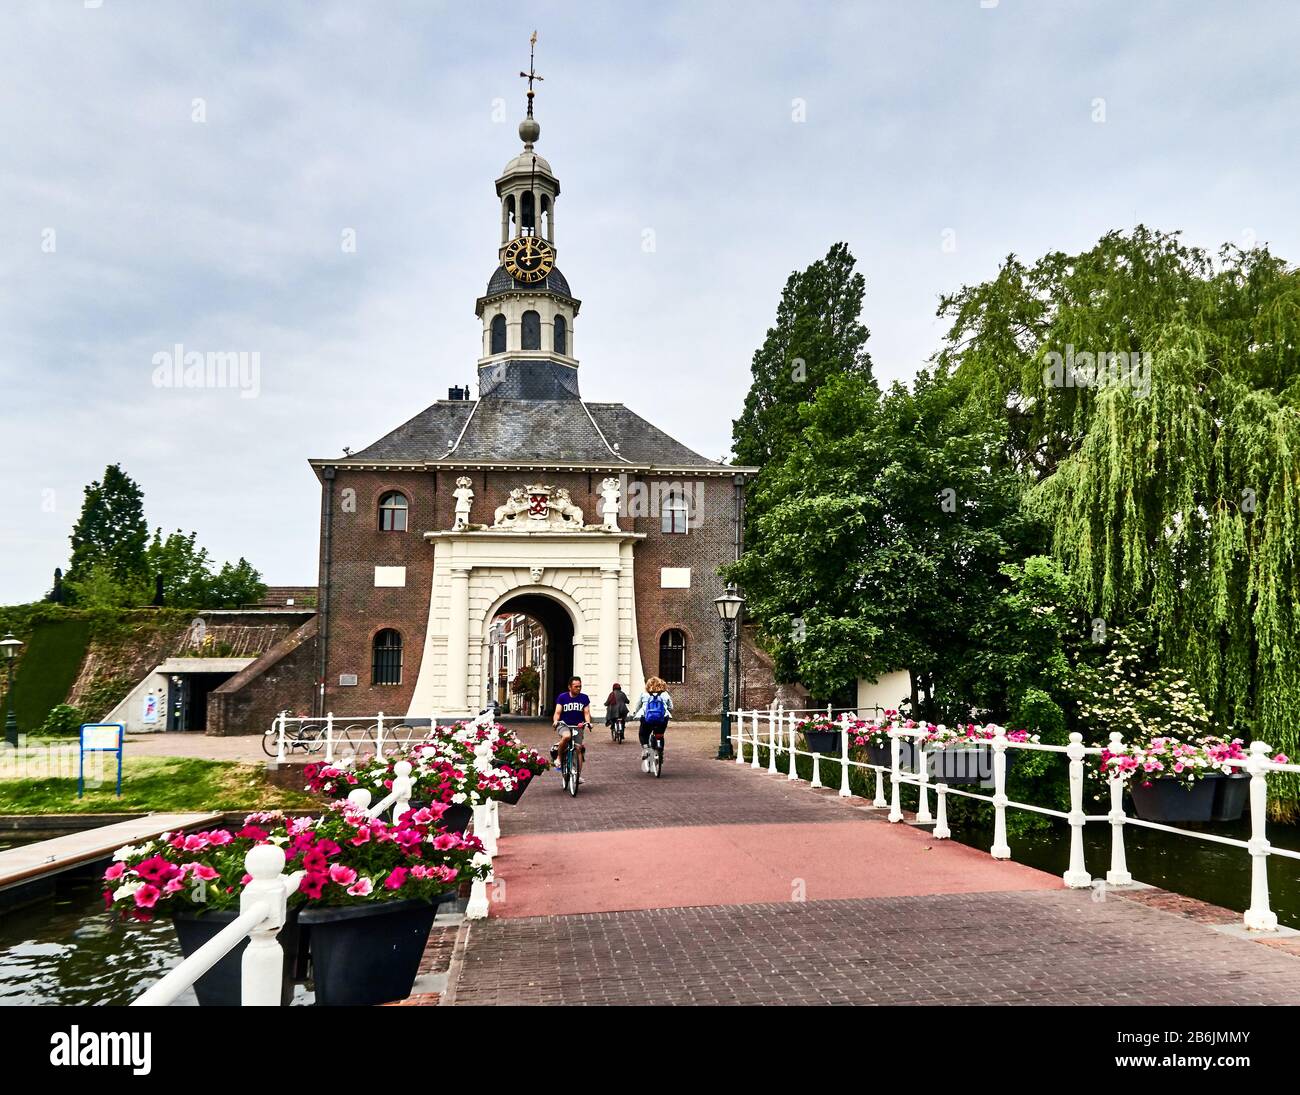 city of Leiden, provincof South Holland, Netherlands, Europe - Zijlpoort is a city gate in Leiden, The gate was built in 1667 in the classical style according to a design by the Leiden architect Willem van der Helm and with sculpture by Rombout Verhulst. Because the gates have to connect with the city wall as well as with a bridge, the building is in the forof a parallelogram. Together with the Morspoort, the Zijlpoort is the only onof the original eight gates that survive. Stock Photo